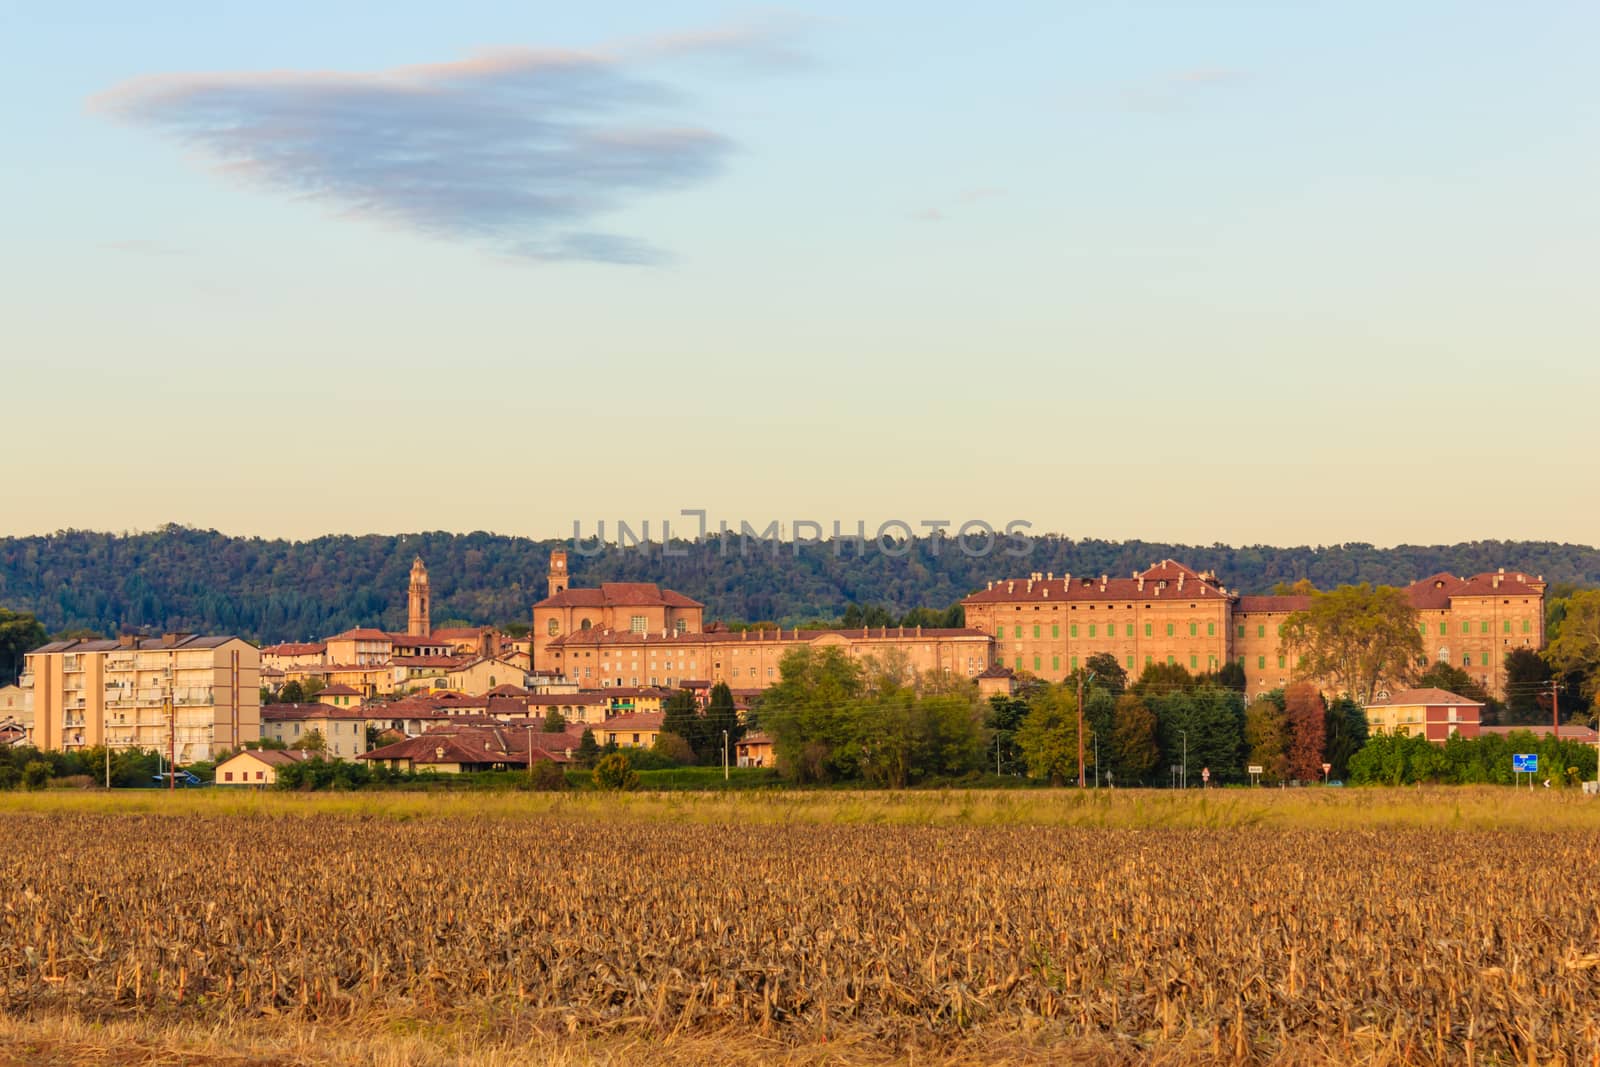 view of the municipality of Agliè in Piedmont Italy, with the ducal castle on the right World Heritage Site Unesco